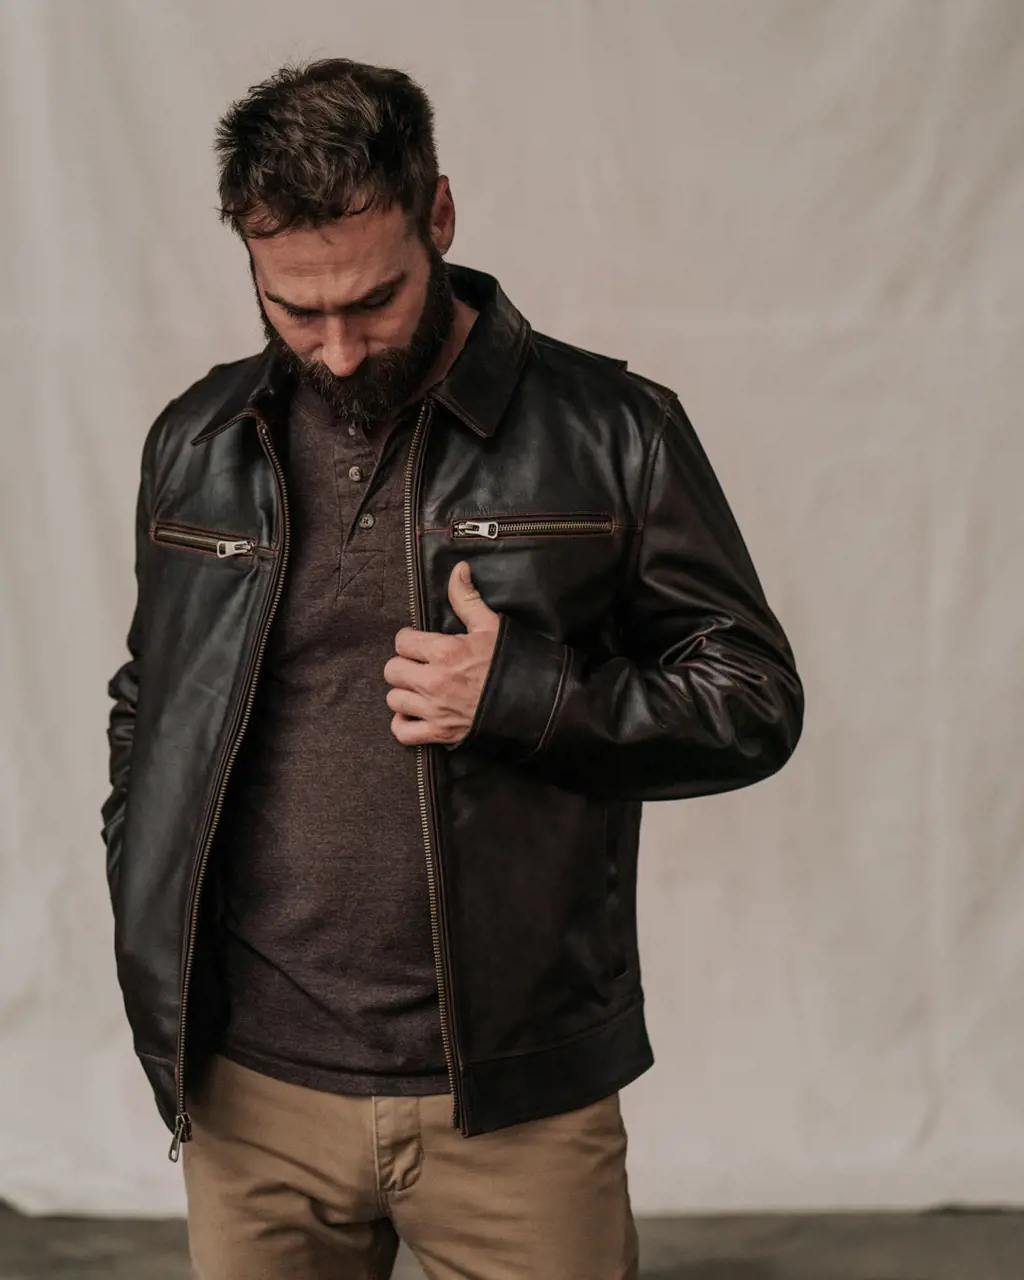 The Ultimate Guide To Choosing The Perfect Leather Jacket For Your ...